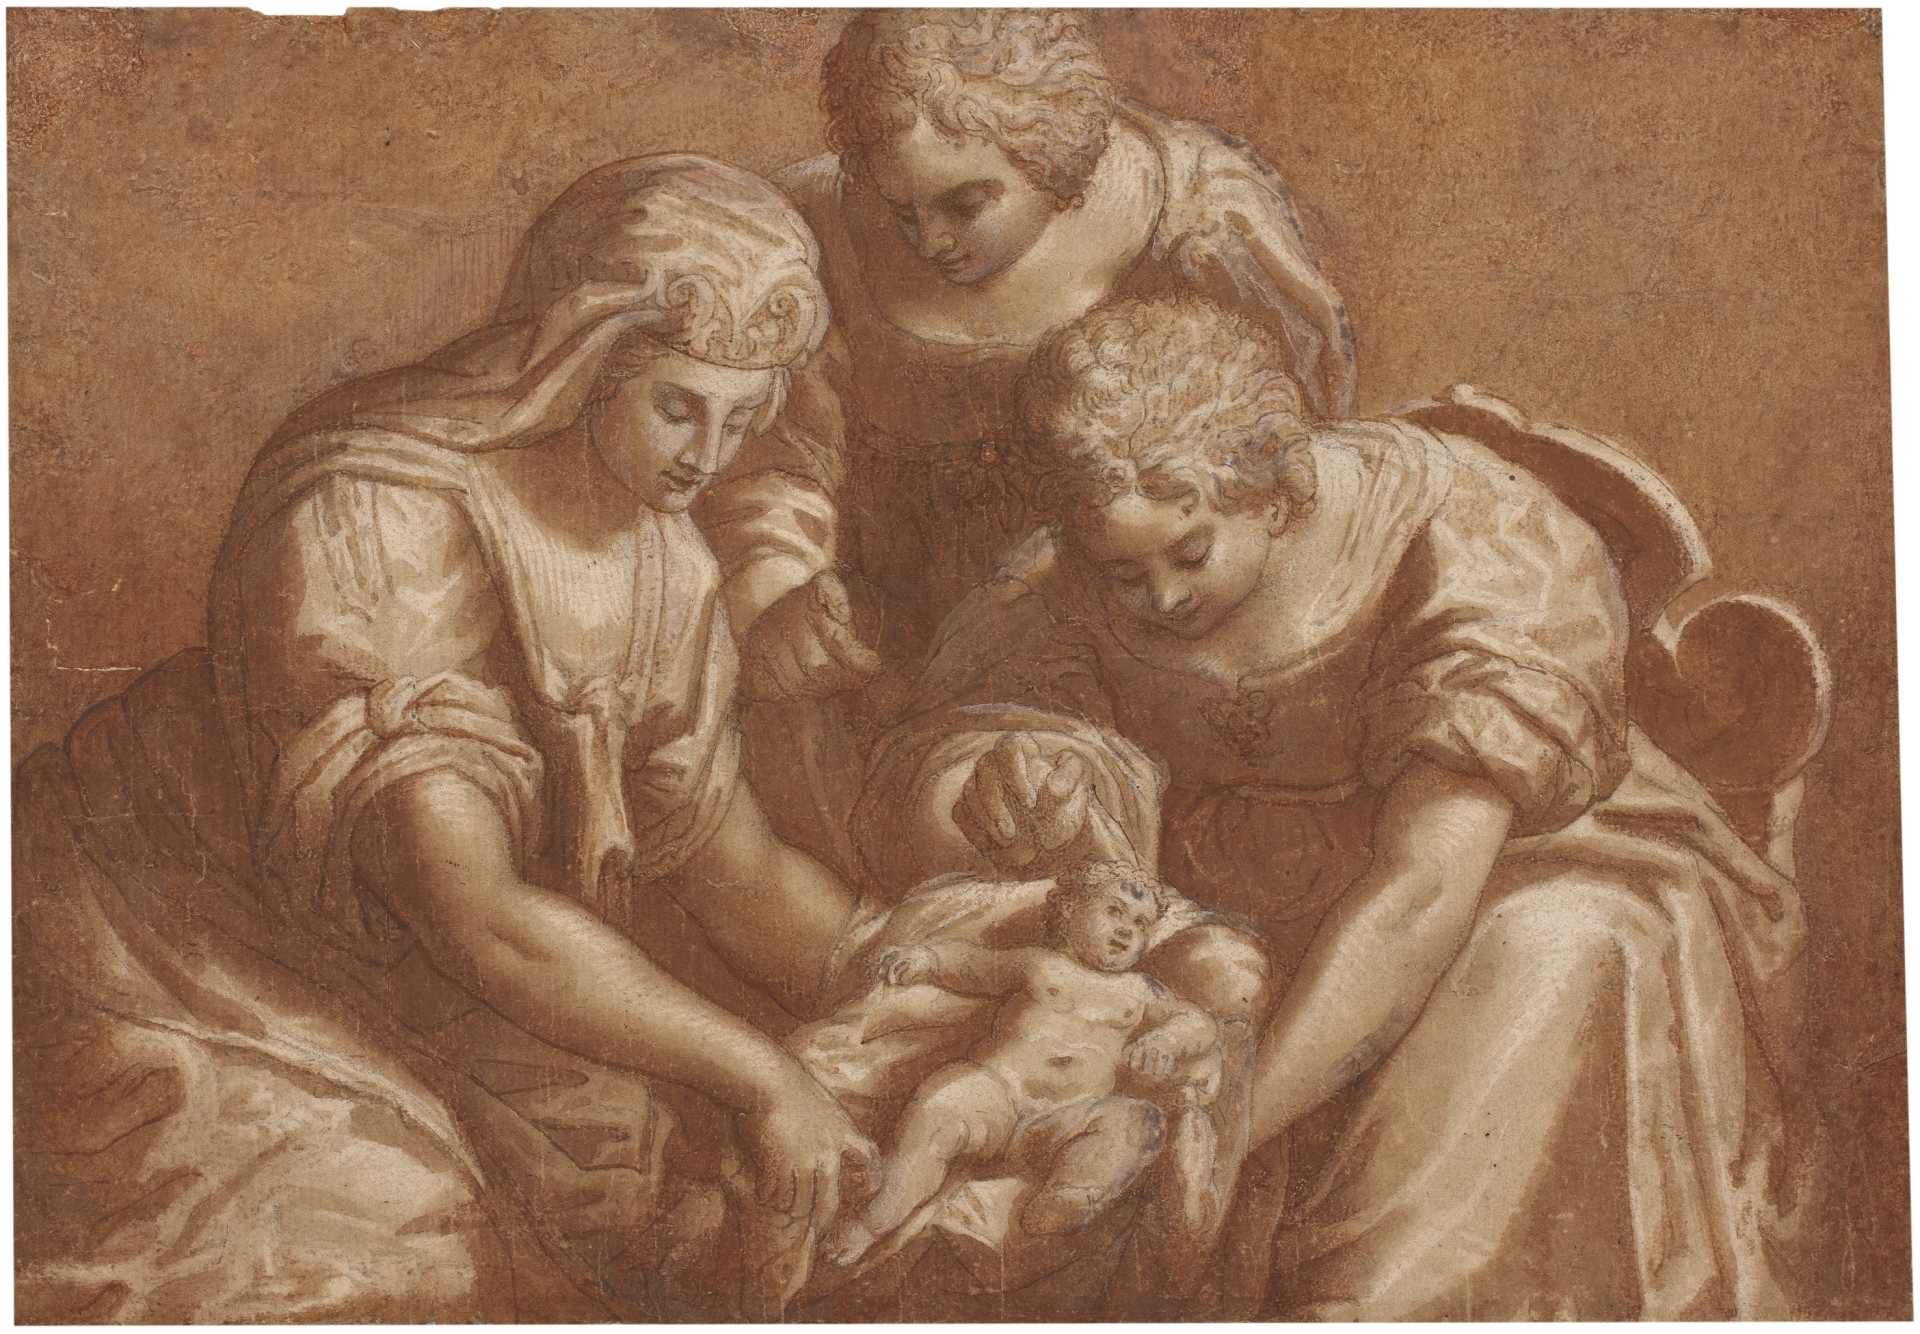 Brown maids pics Pharaoh S Daughter With Two Serving Maids Tending The Infant Moses The Collection Museo Nacional Del Prado